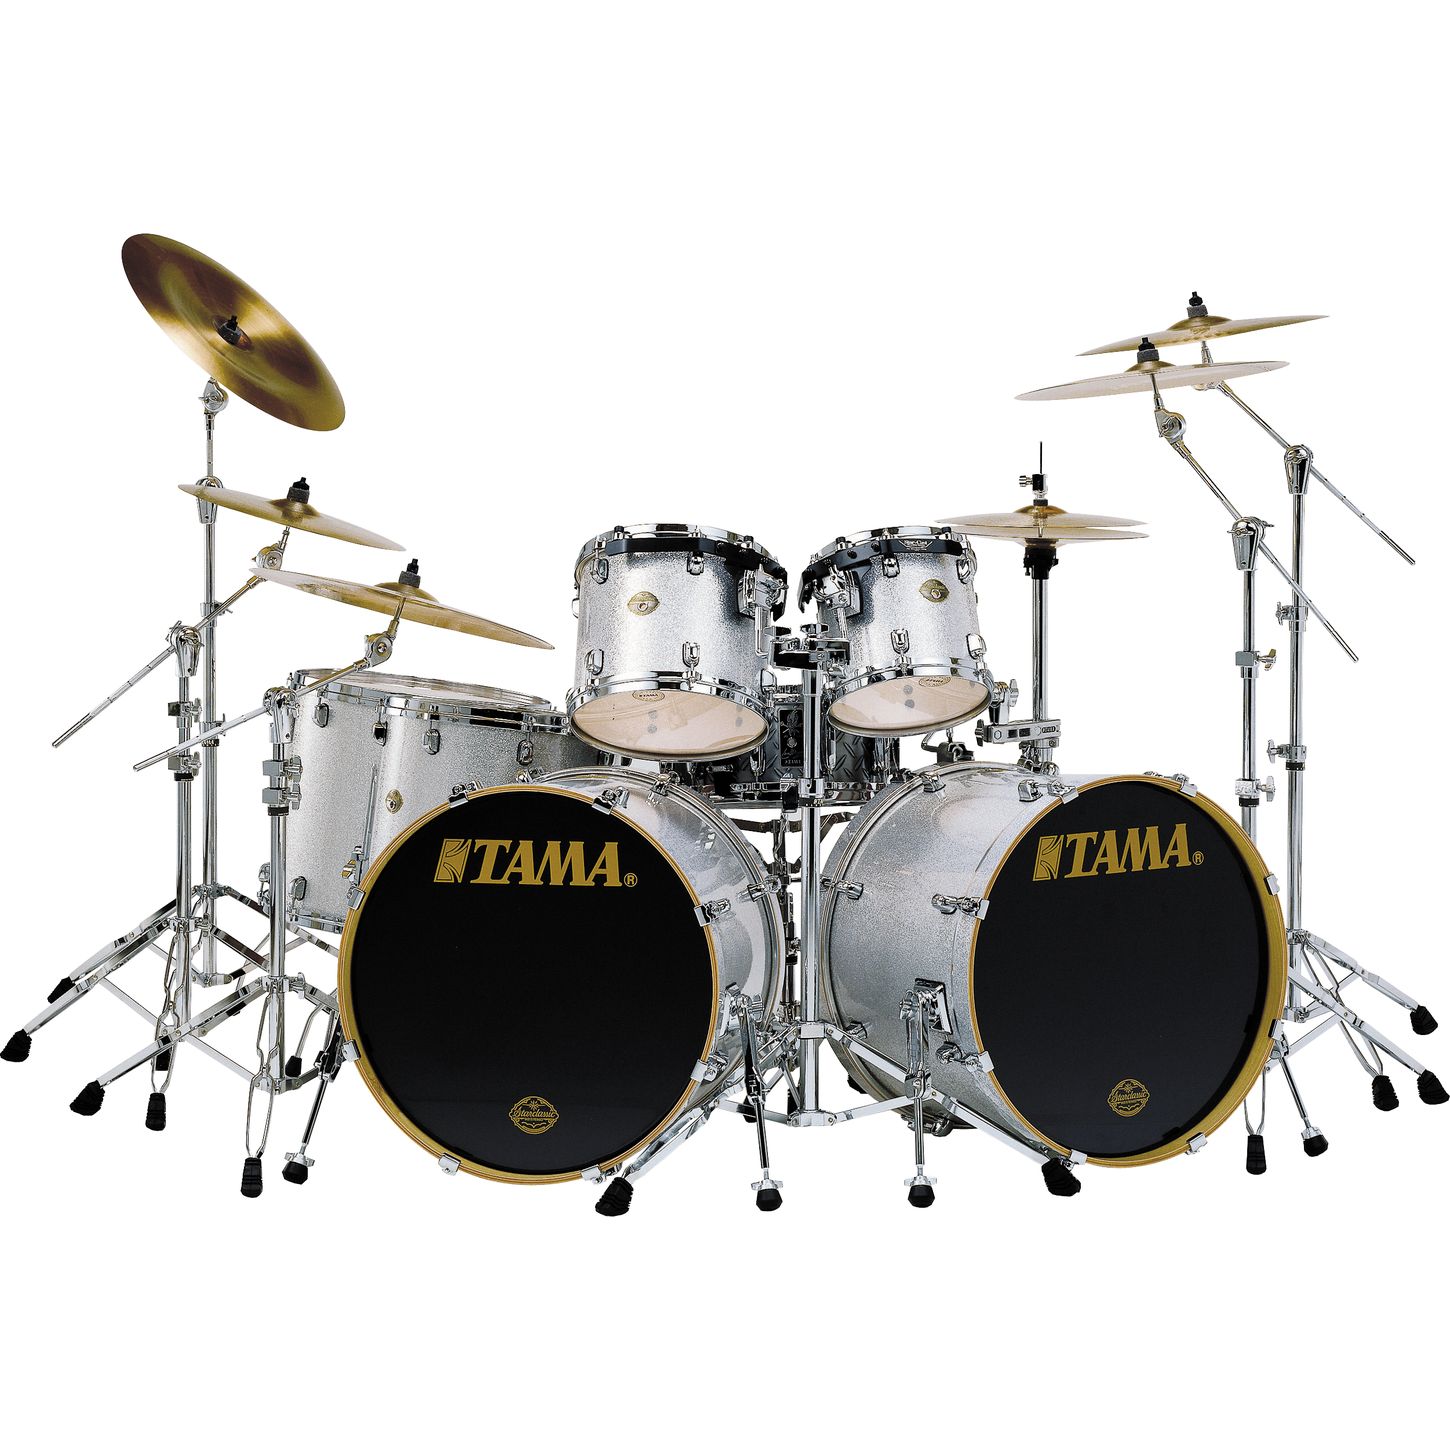 Tama SC Performer Double Bass Drumset | Musician's Friend